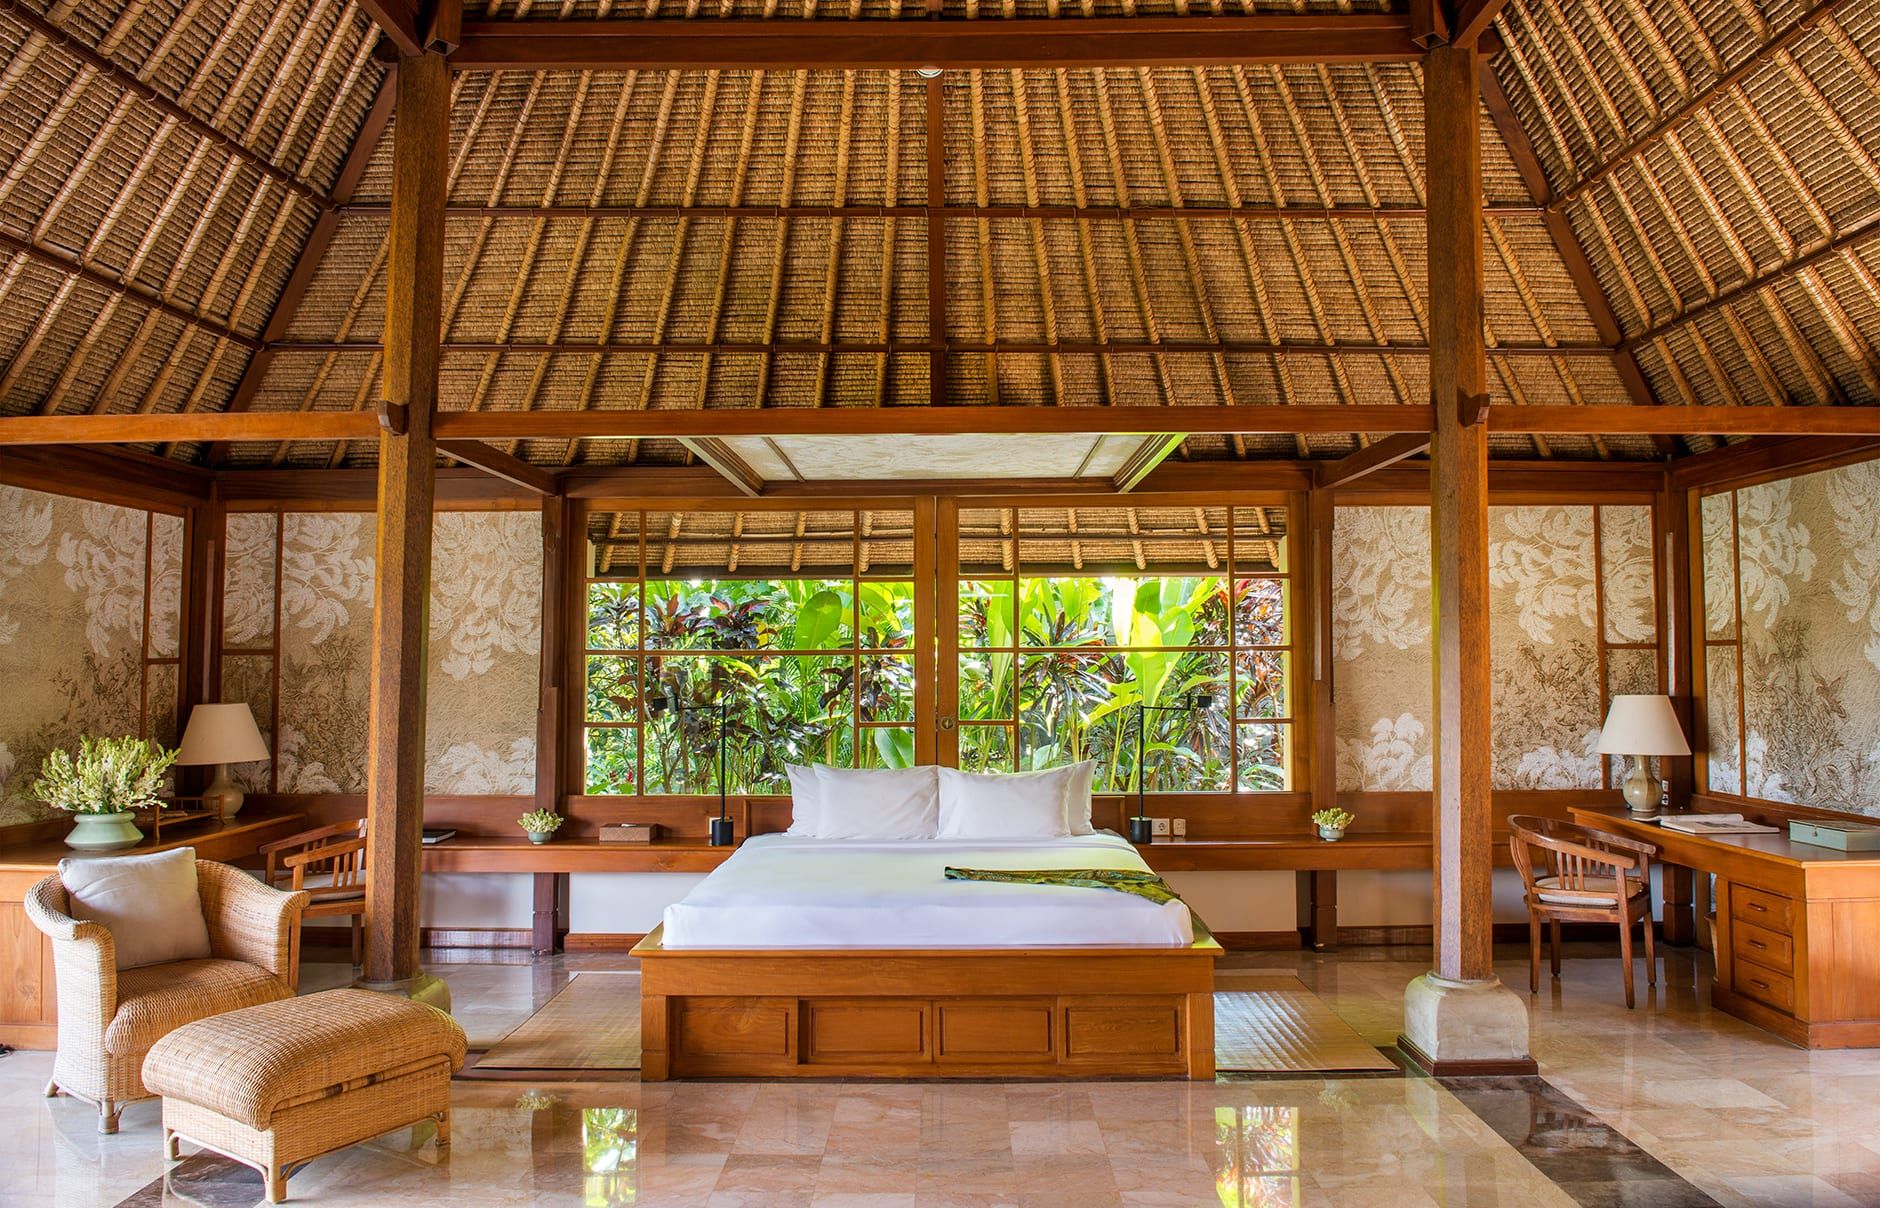 Stunning Luxury Resorts In Bali For The Dreamiest Tropical Vacation